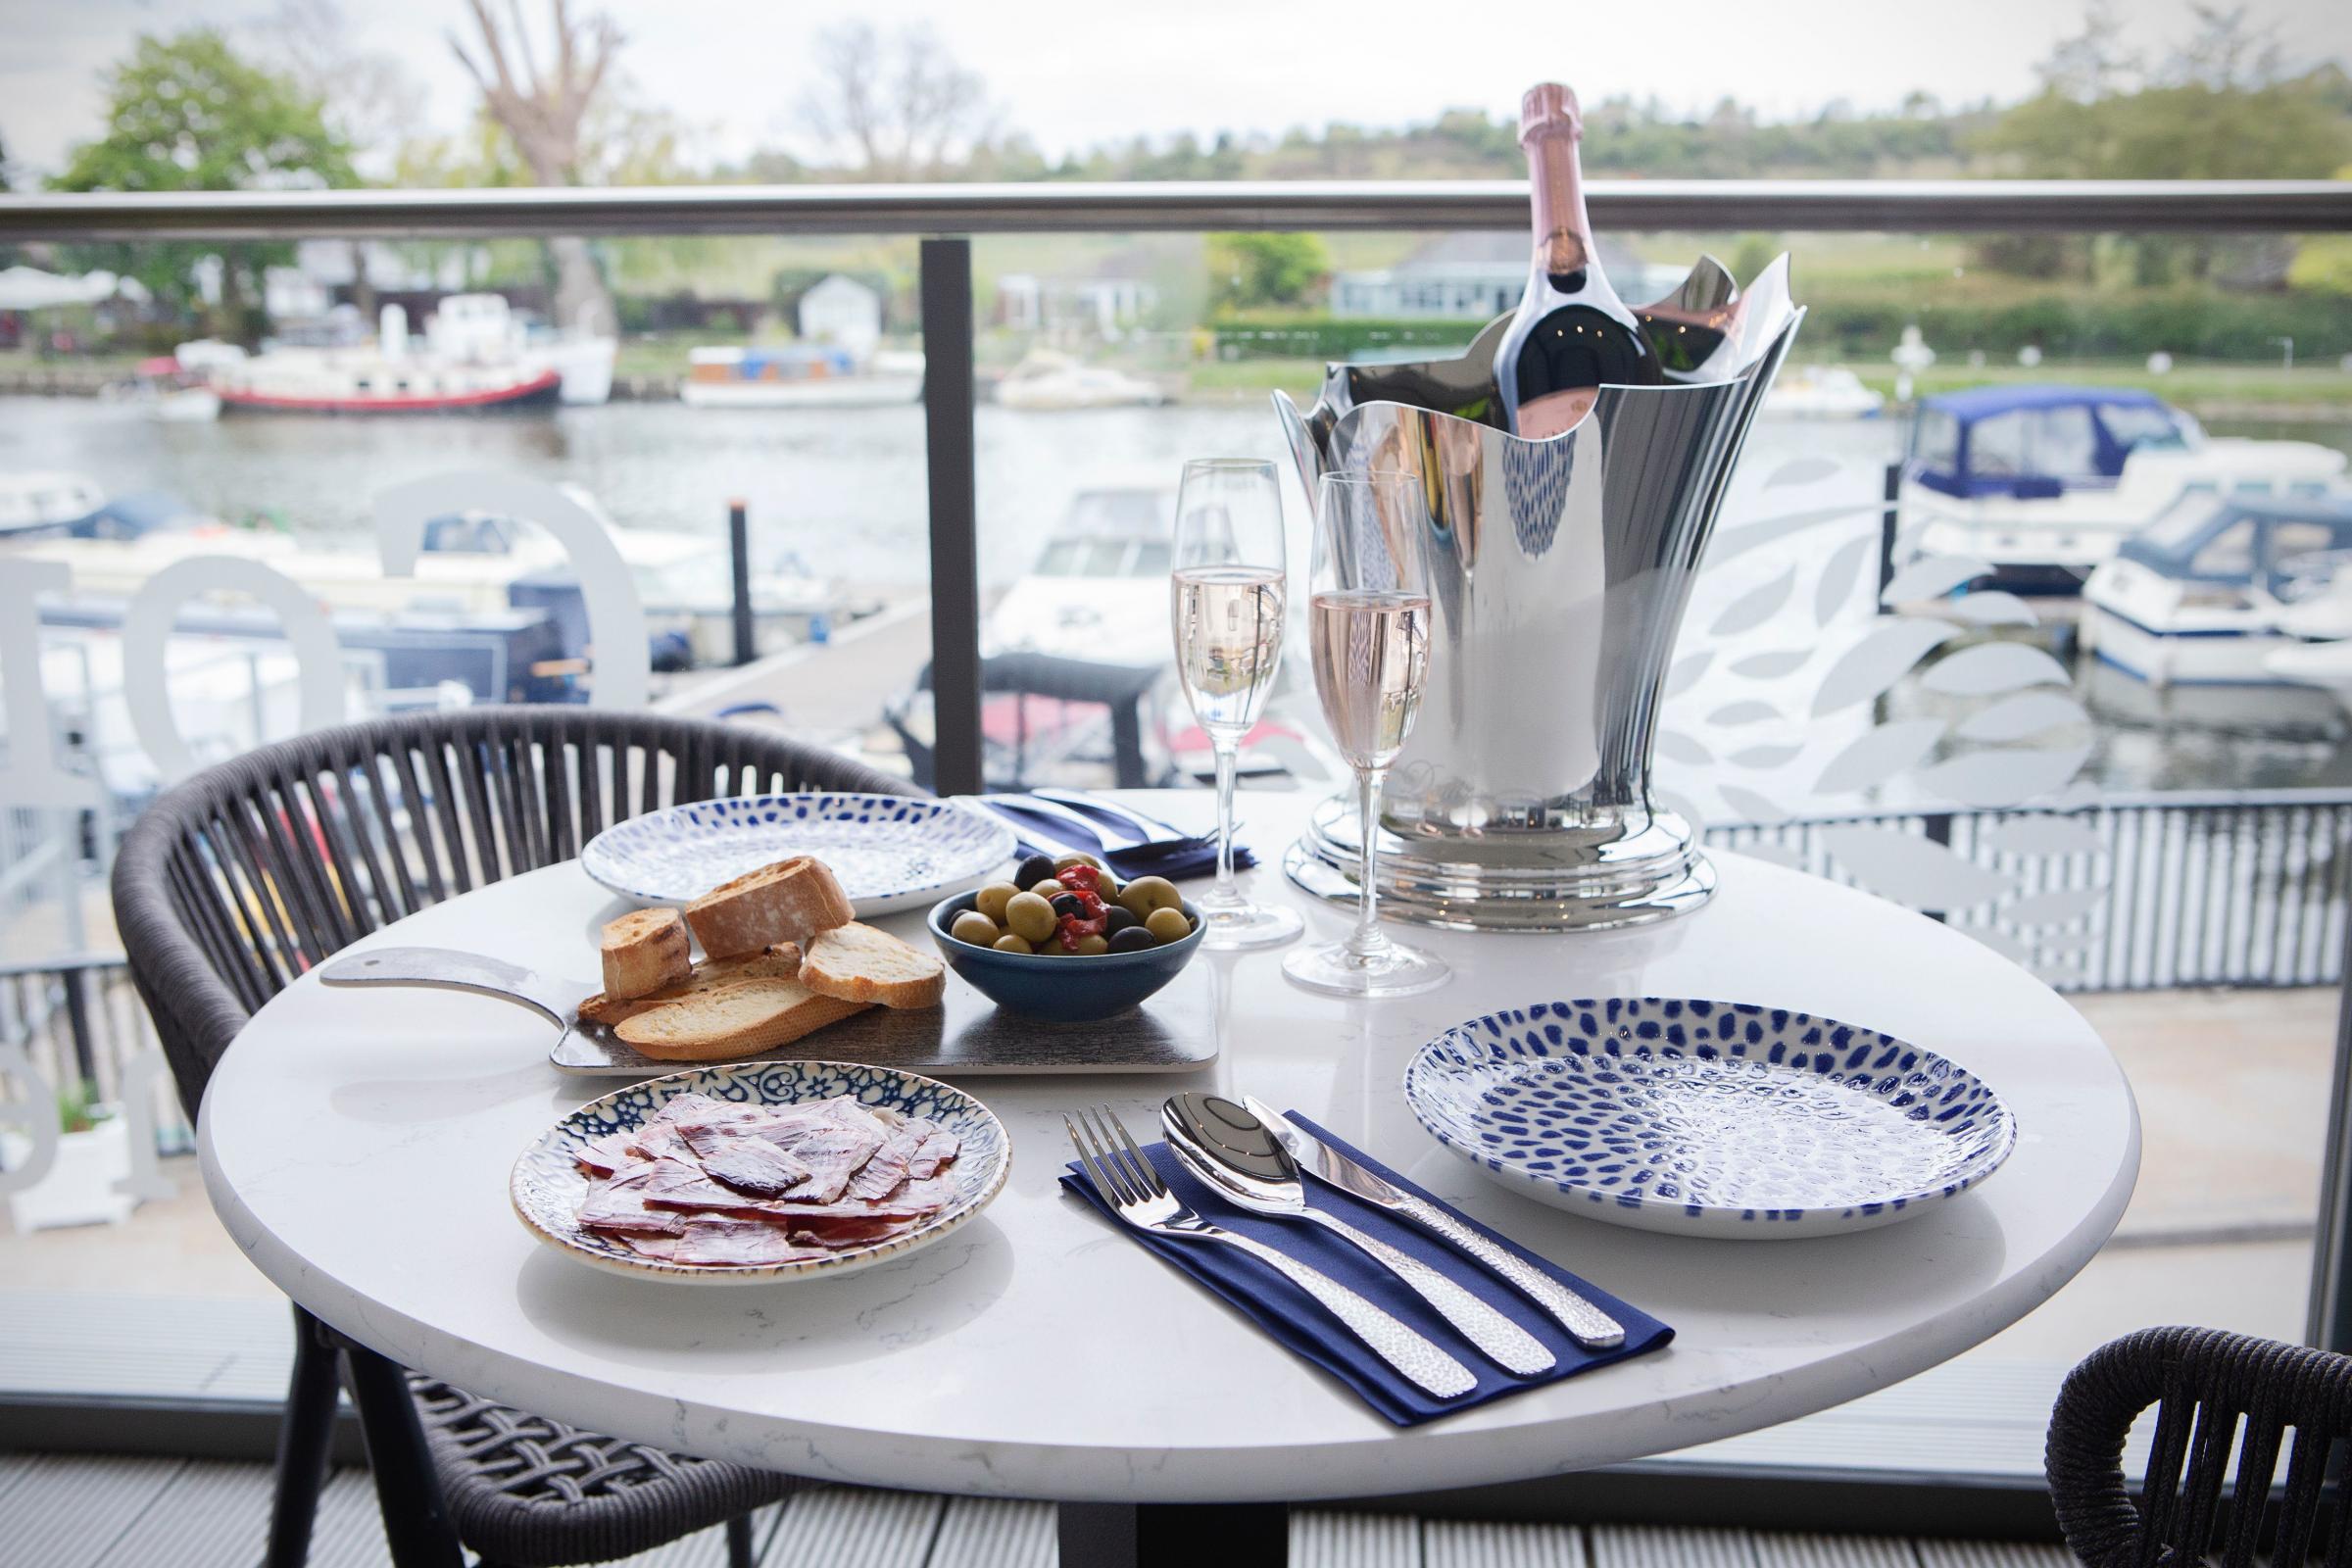 Corazón del Río is opening at Bourne End Marina